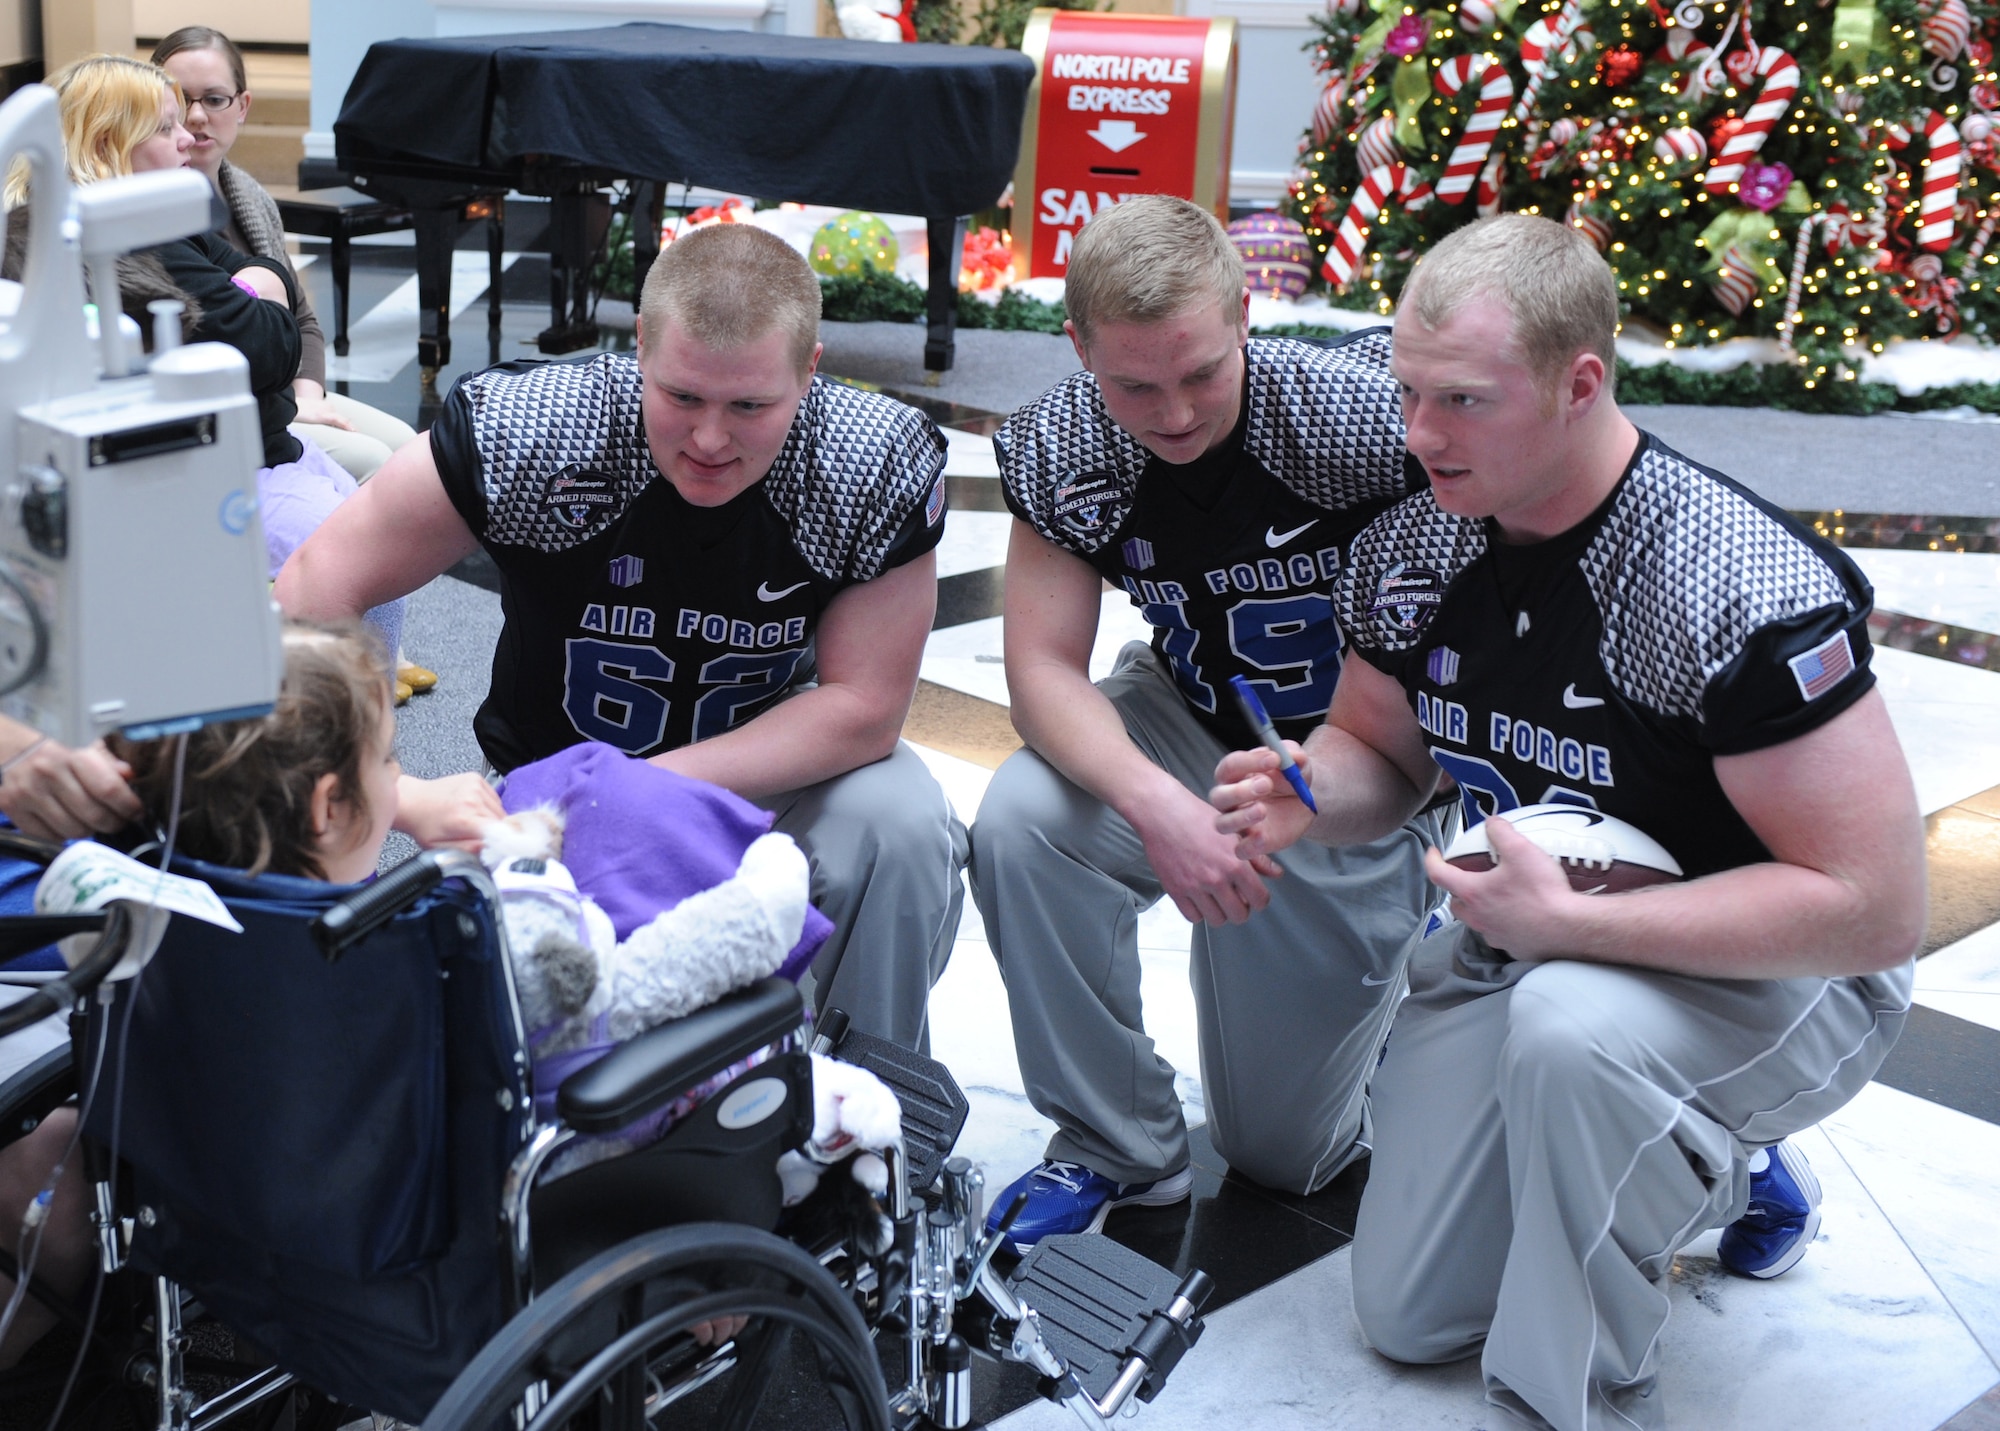 Air Force football players David Lore, Zach Hoffman and Troy Timmerman talk with and autograph a football for a patient at the Cooks Children's Medical Center in Fort Worth, Texas, Dec. 27, 2012. Lore is a starter at guard and a backup center; Hoffman is a punter, and Timmerman is a defensive lineman. (U.S. Air Force photo/John Van Winkle)